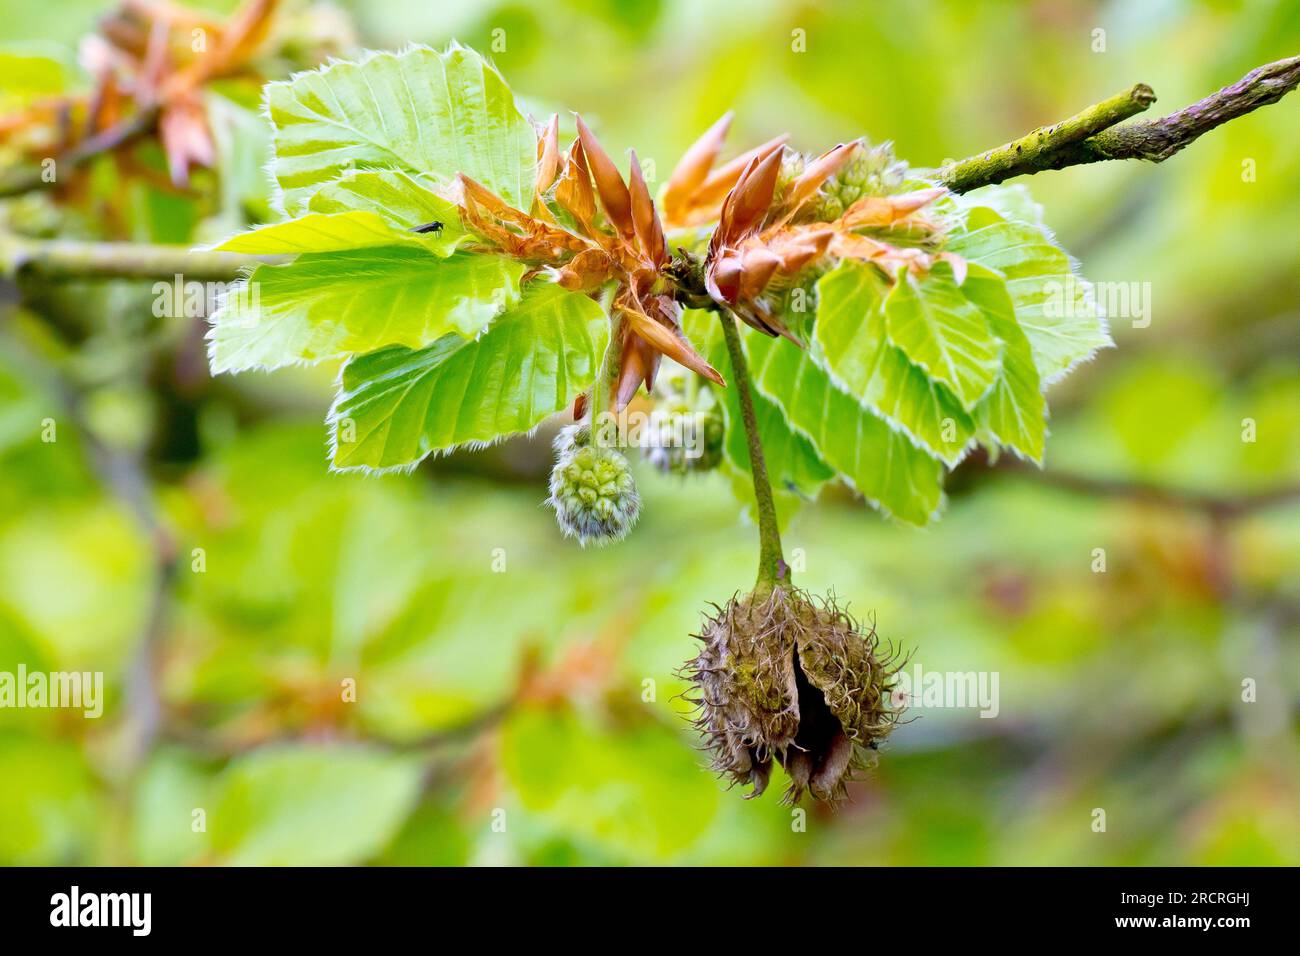 Beech (fagus sylvatica), close up showing the male flowers of the tree growing amongst the new leaves put out in the spring. Stock Photo